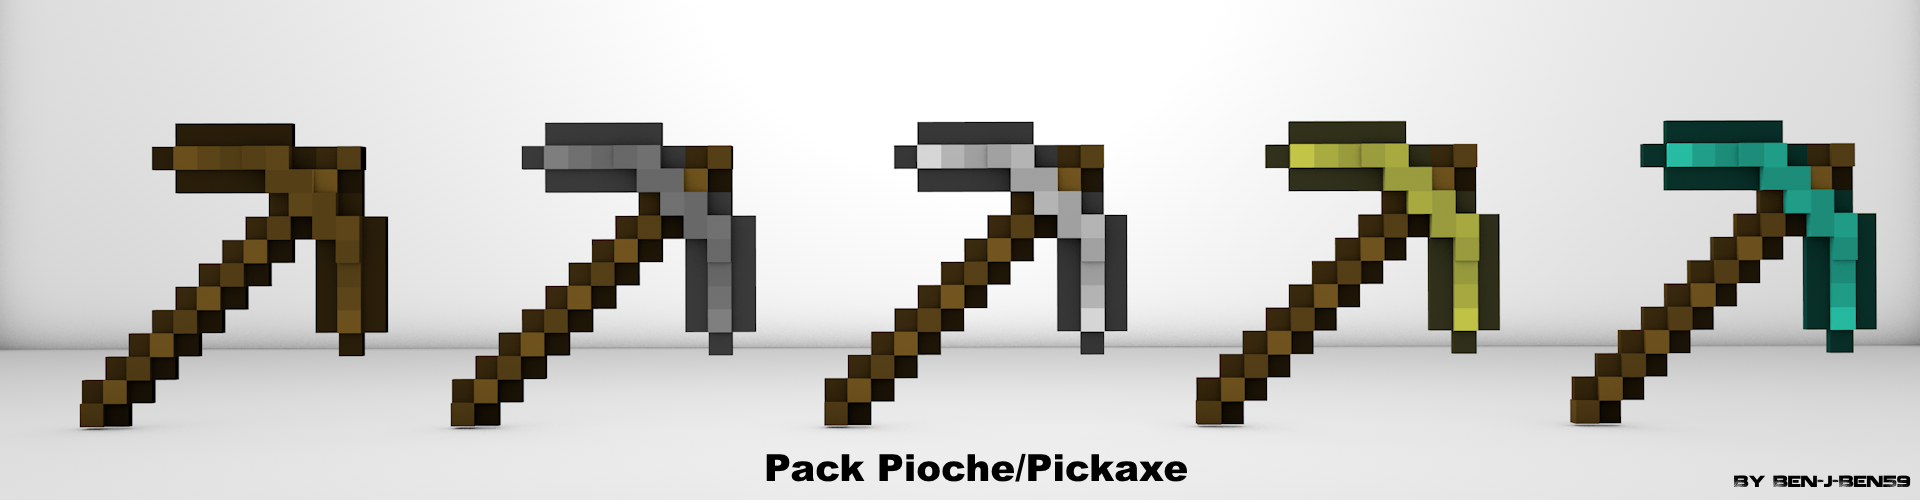 Pack_Pioche.png